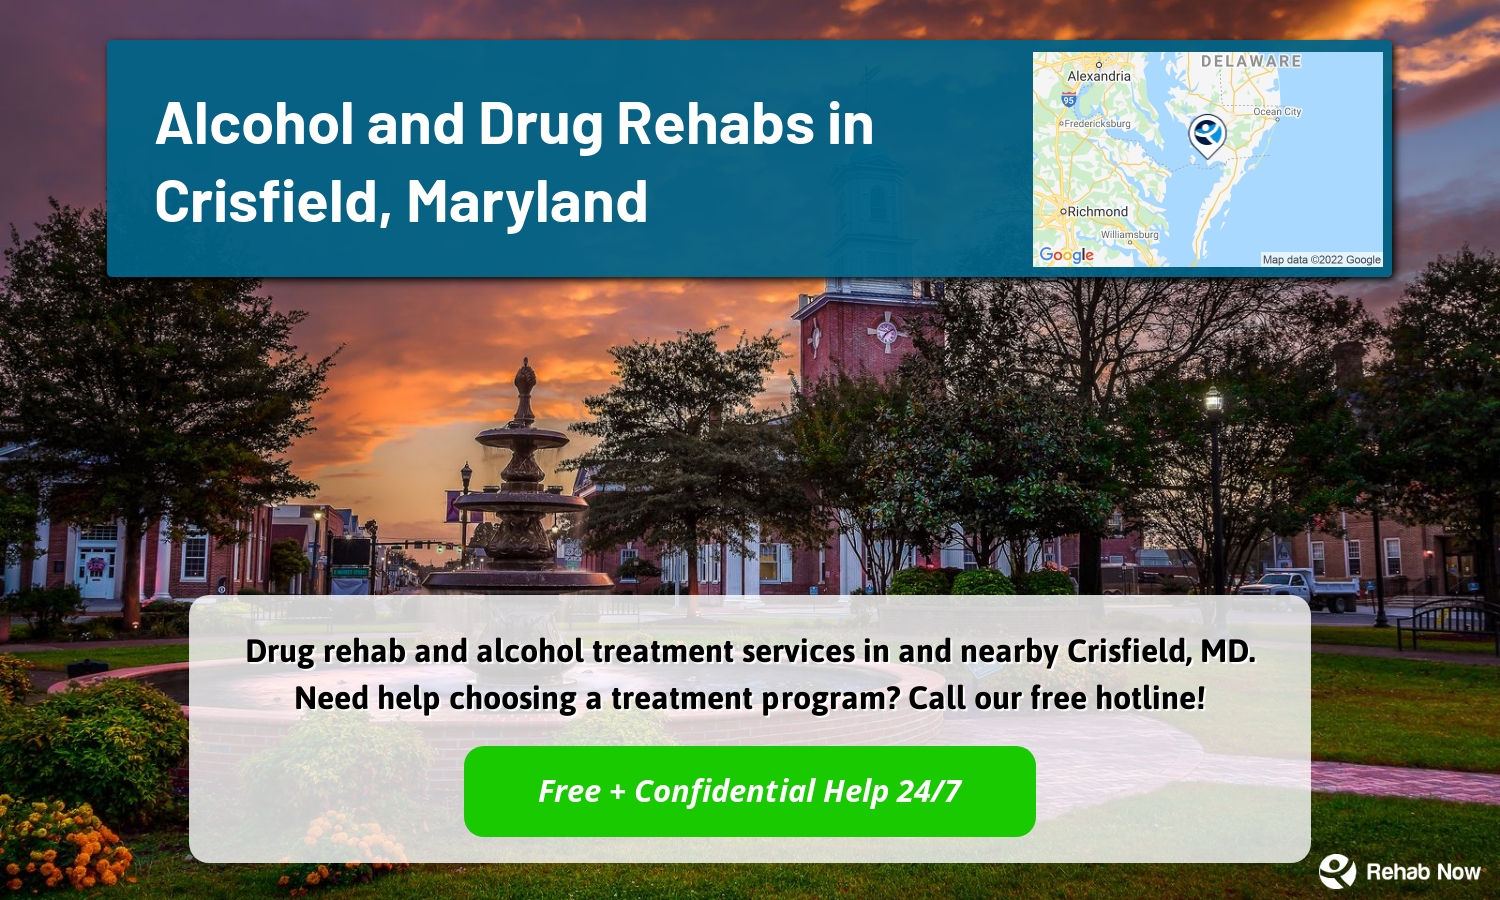 Drug rehab and alcohol treatment services in and nearby Crisfield, MD. Need help choosing a treatment program? Call our free hotline!